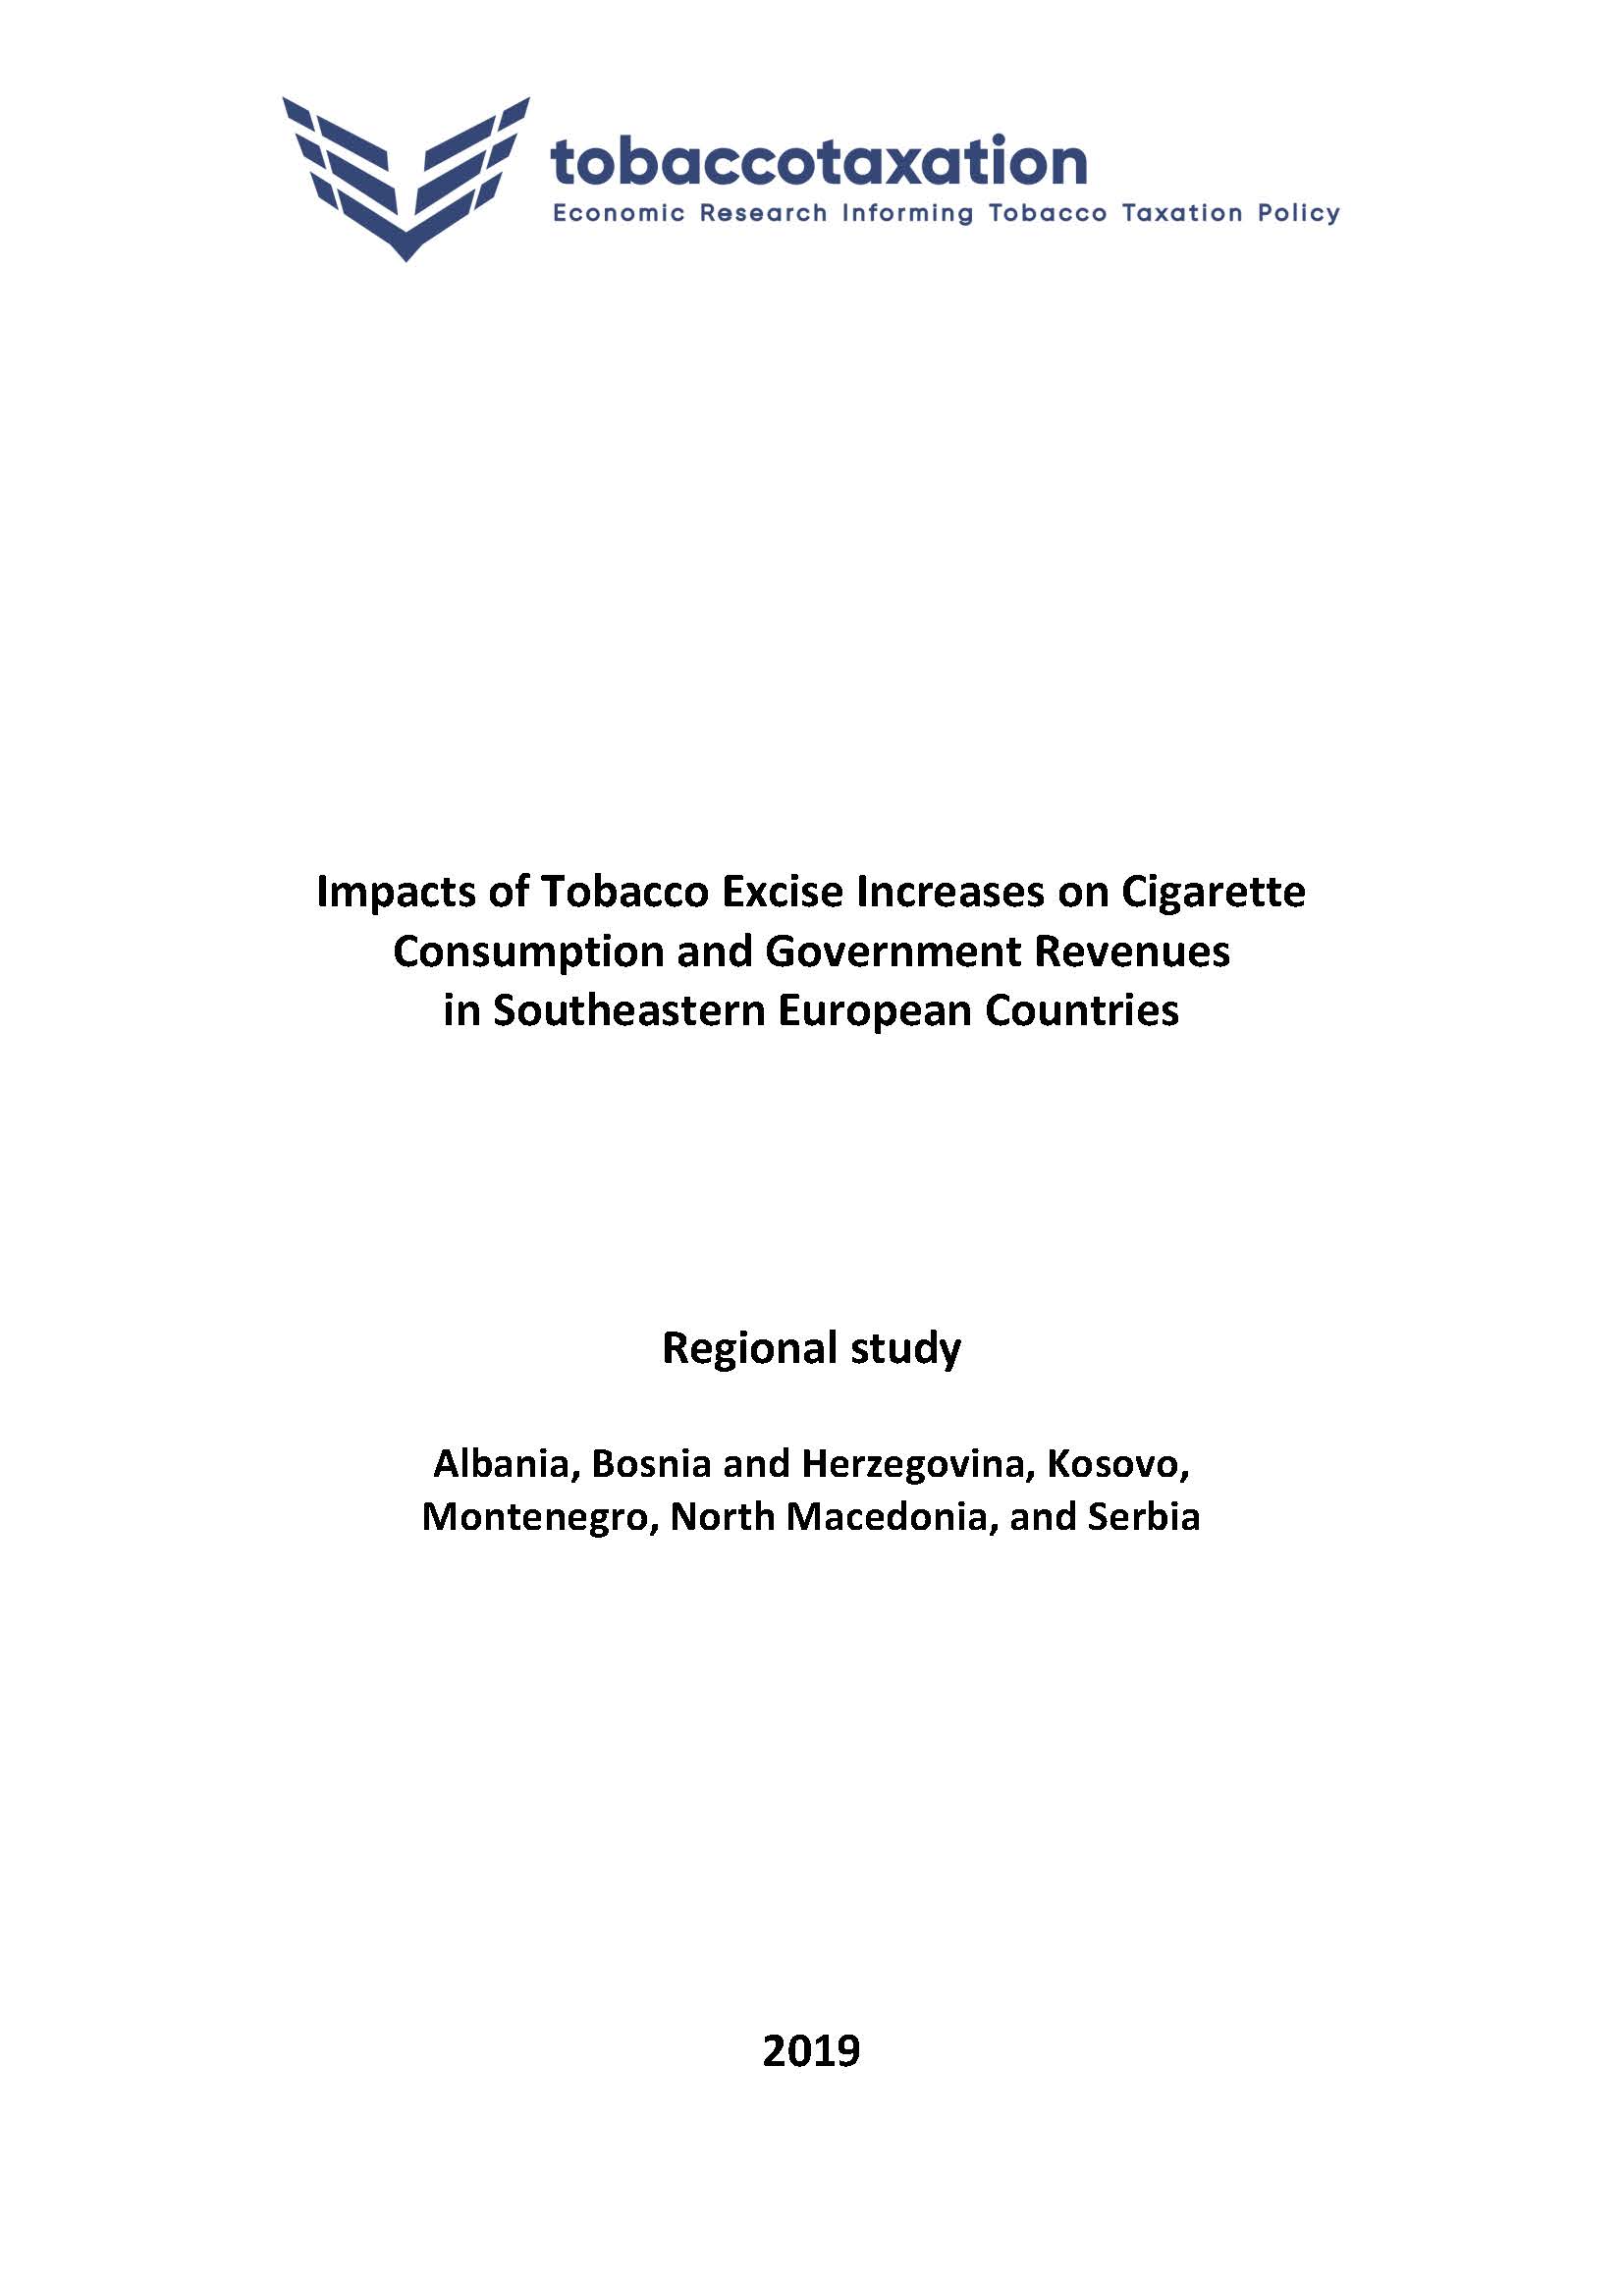 Impacts of Tobacco Excise Increases on Cigarette Consumption and Government Revenues in Southeastern European Countries